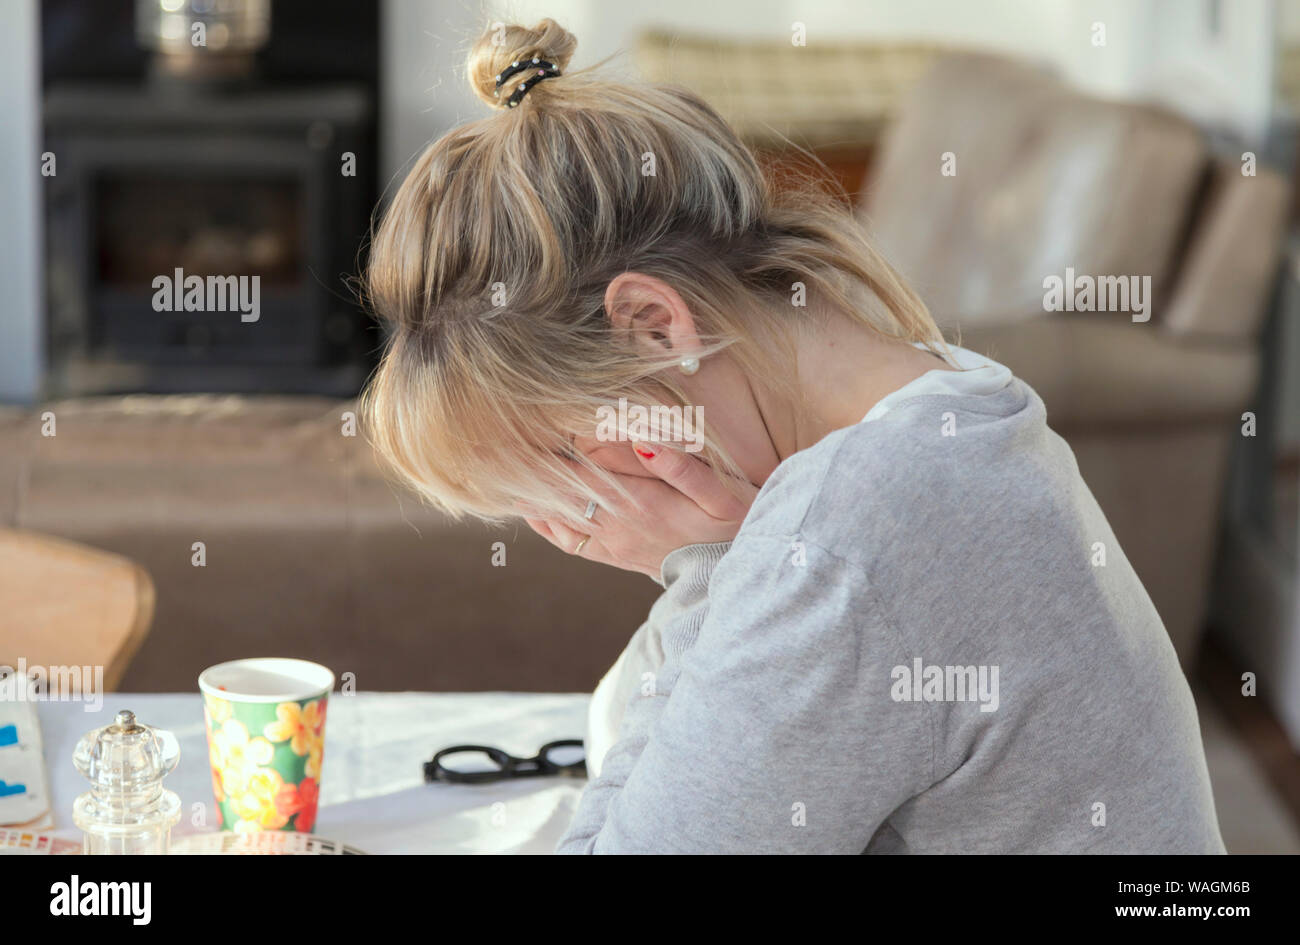 Unhappy young lady sitting with her head in her hands and covering her face. Stock Photo